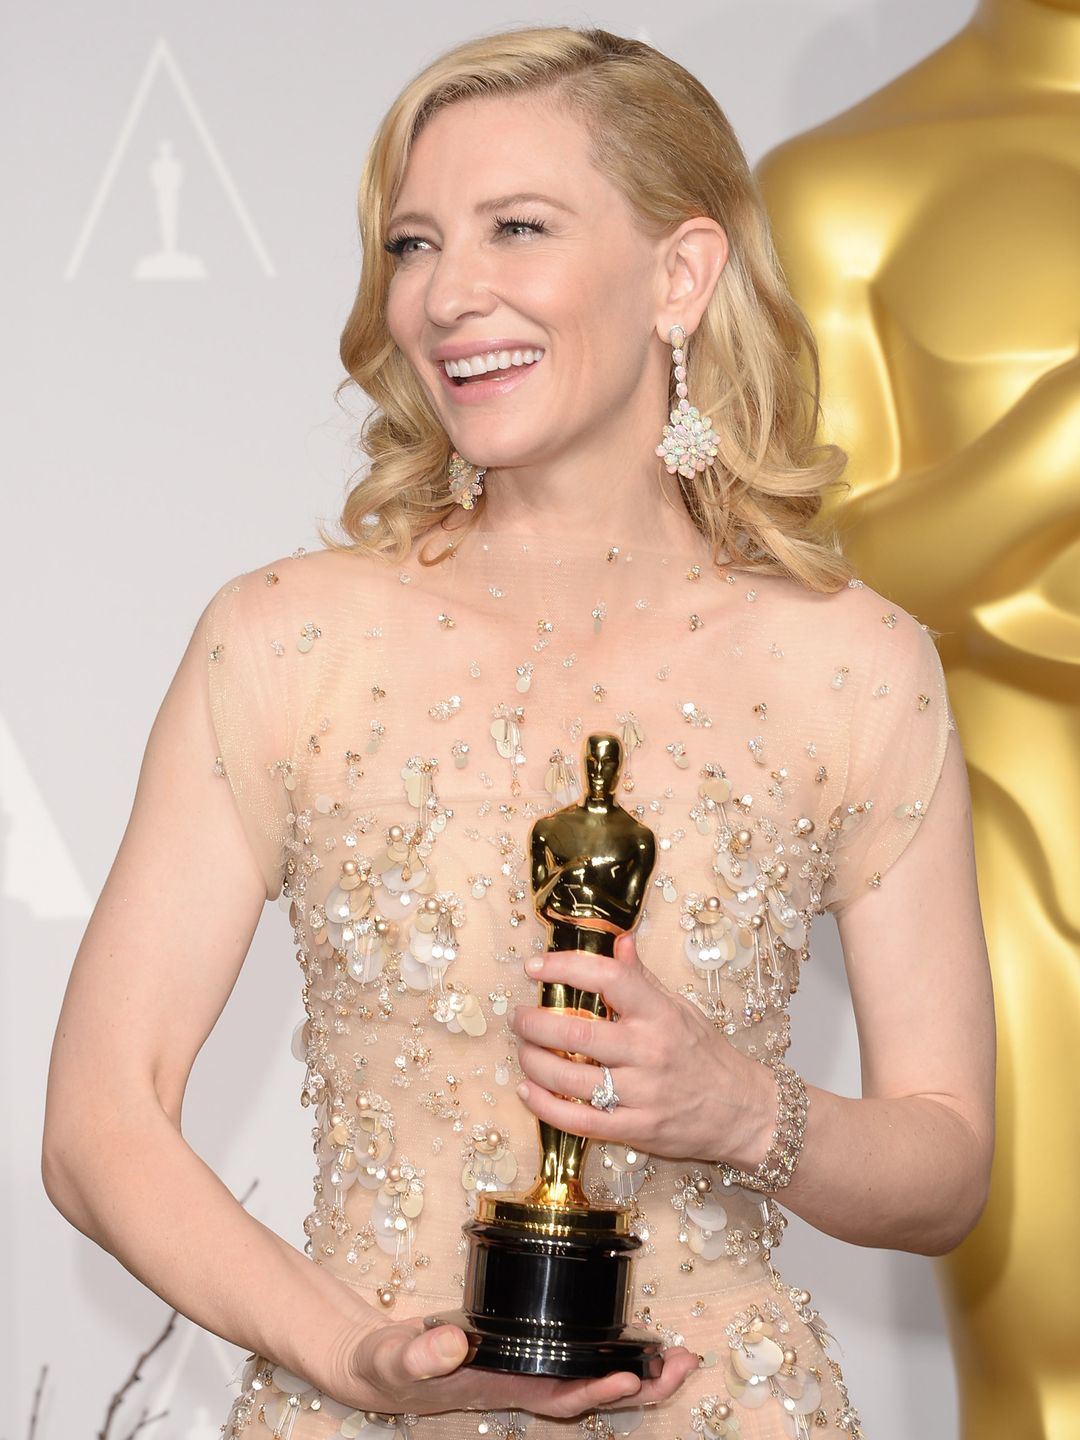 HOLLYWOOD, CA - MARCH 02:  Actress Cate Blanchett, winner of Best Actress for "Blue Jasmine, poses in the press room during the Oscars at Loews Hollywood Hotel on March 2, 2014 in Hollywood, California.  (Photo by Jason Merritt/Getty Images)